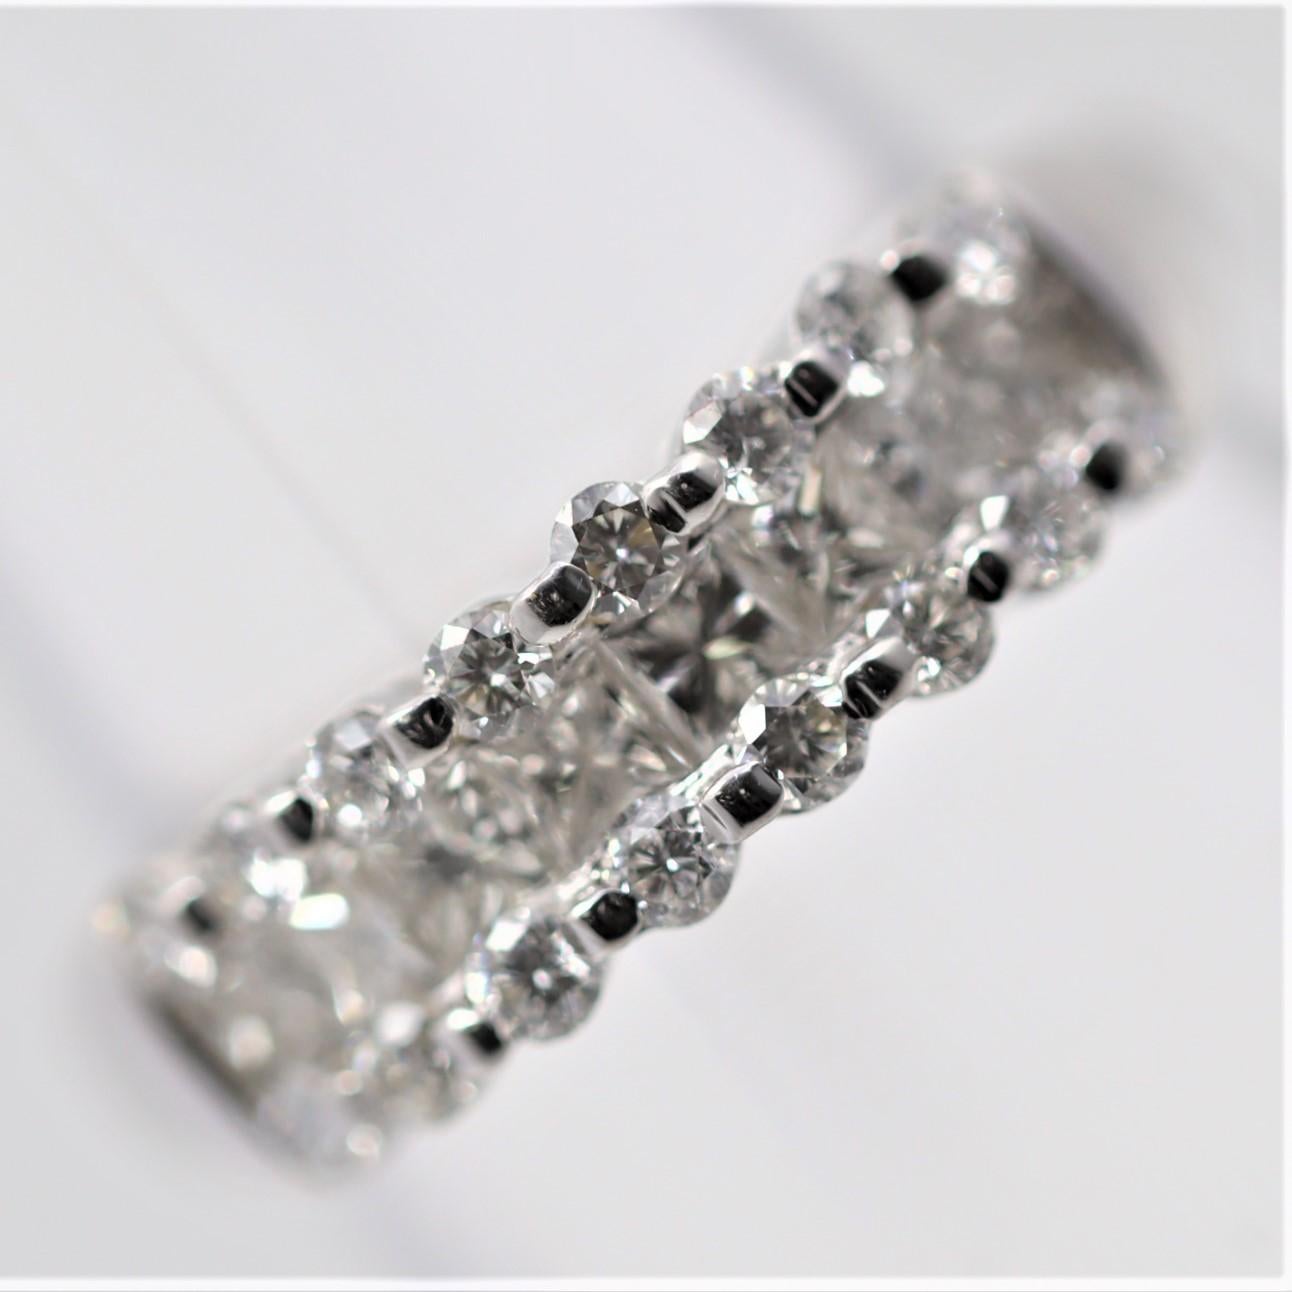 A simple yet stylish piece that can be worn casually every day. It features 1.00 carat of diamonds, two rows of round brilliant-cuts and a single row of princess-cut diamonds in its center. Made in 18k white gold and ready to be worn.

Ring Size 5.75